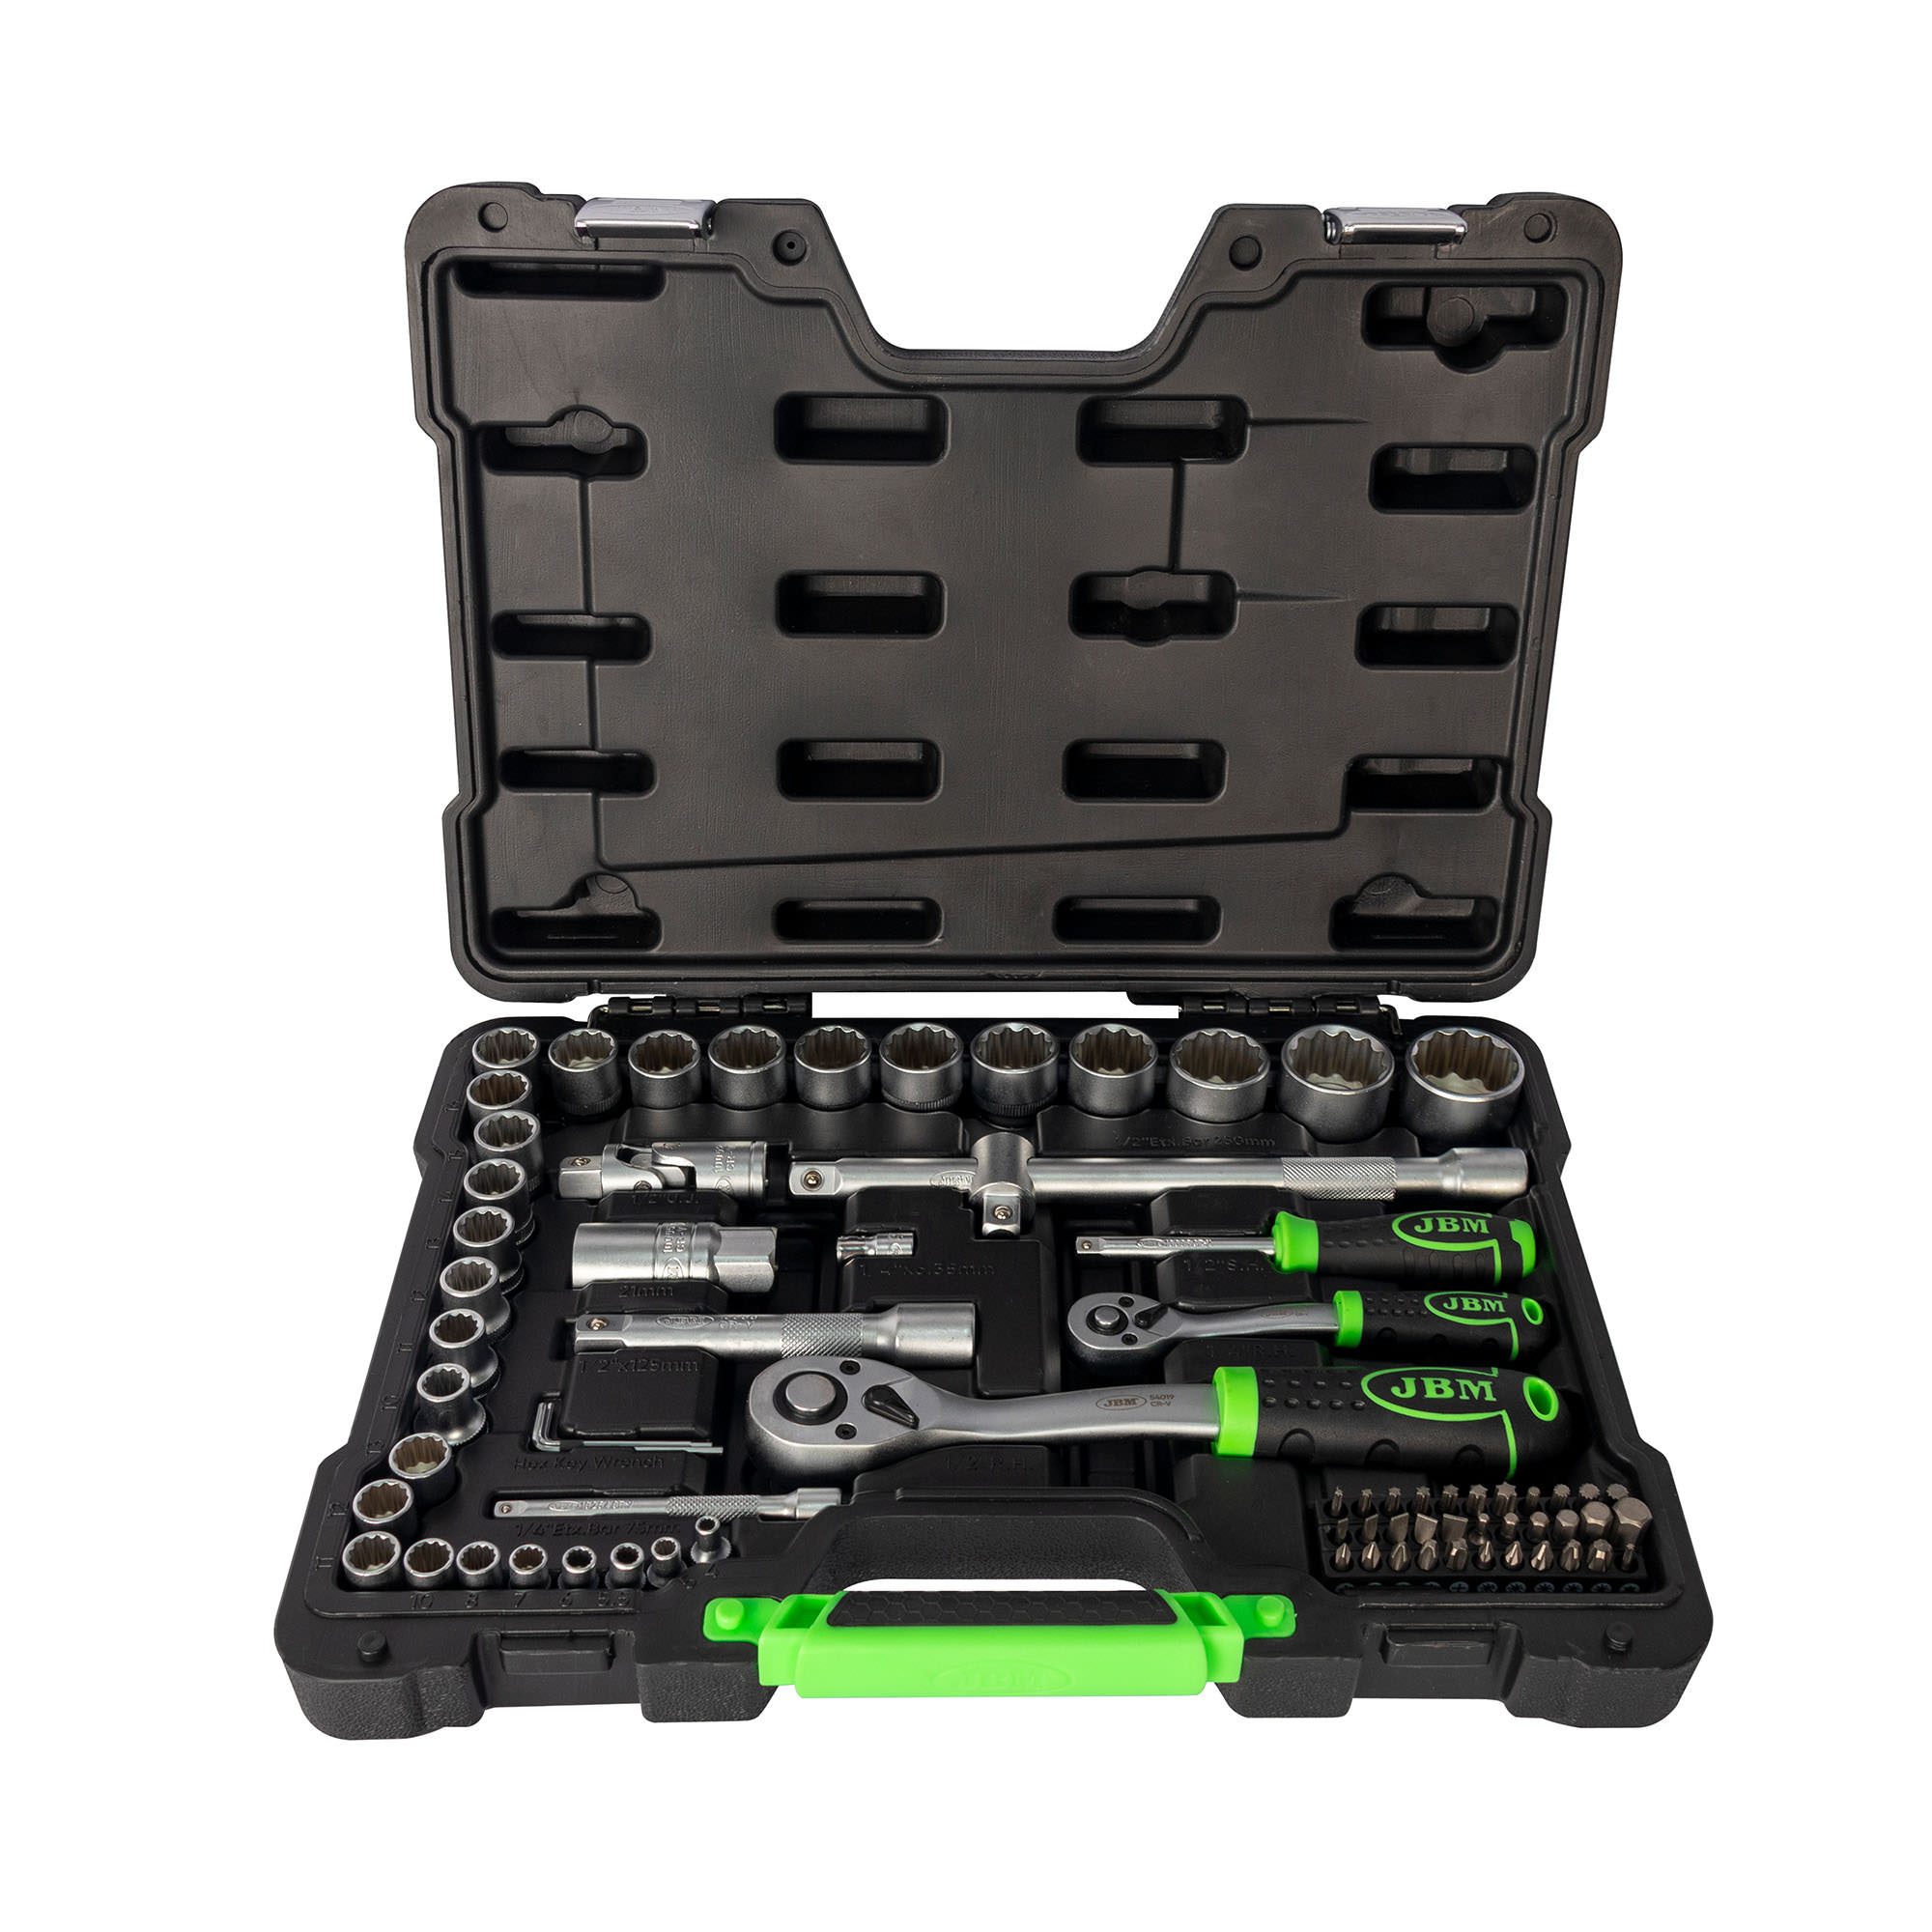 74-PIECE TOOL CASE WITH 12-EDGED SOCKETS - ZINC FINISH